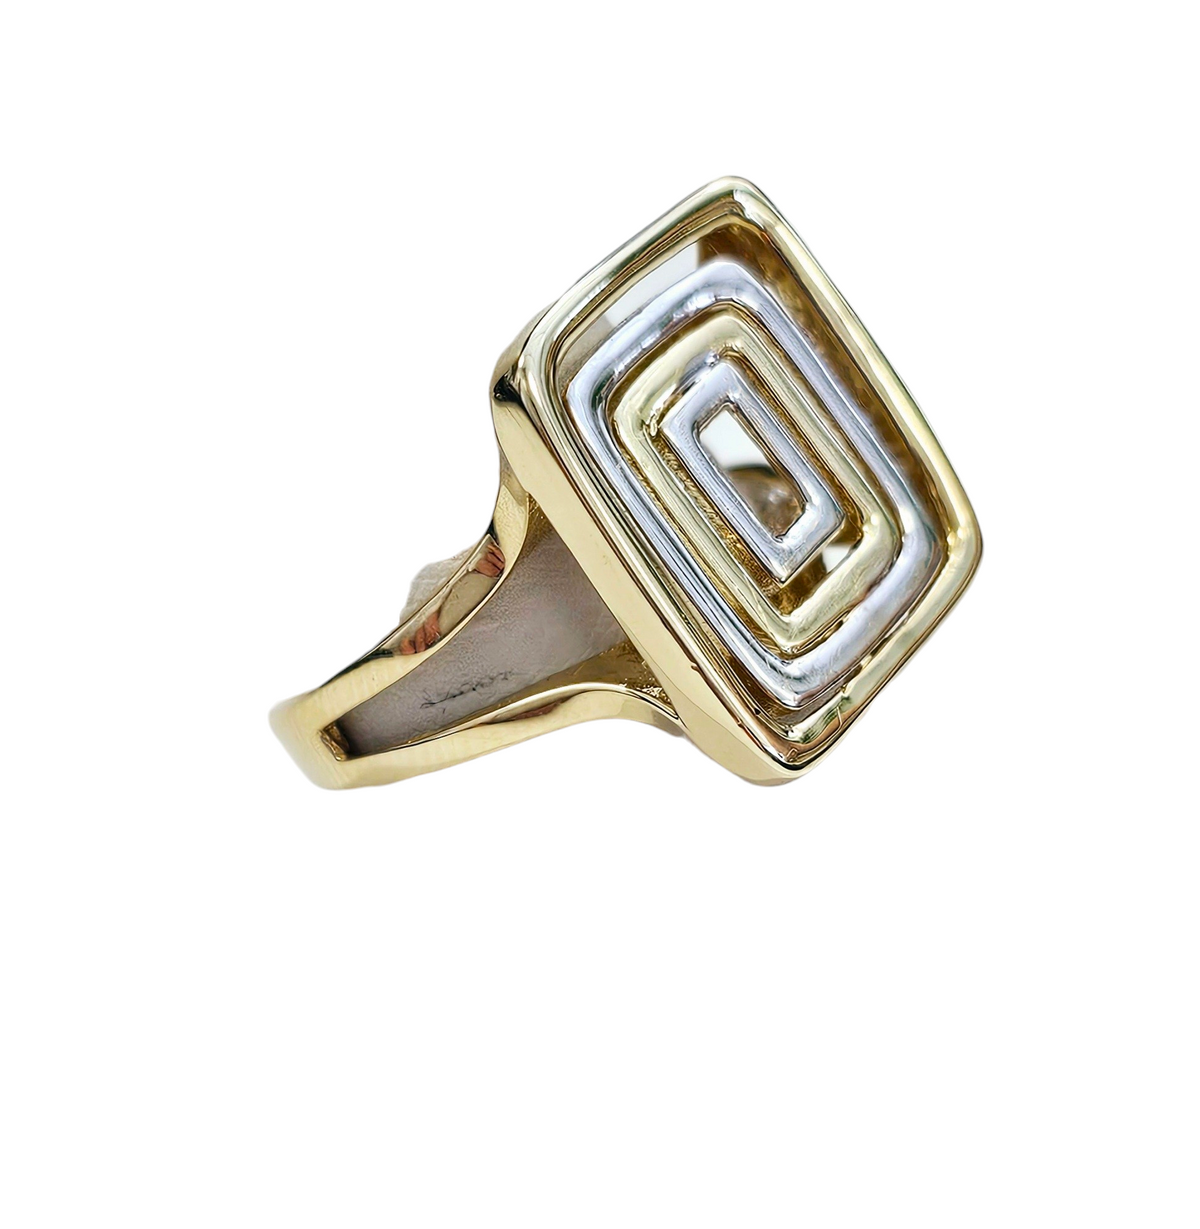 Modern Geometric Design Two-Tone Ring Made in 14-Karat Yellow and White Gold